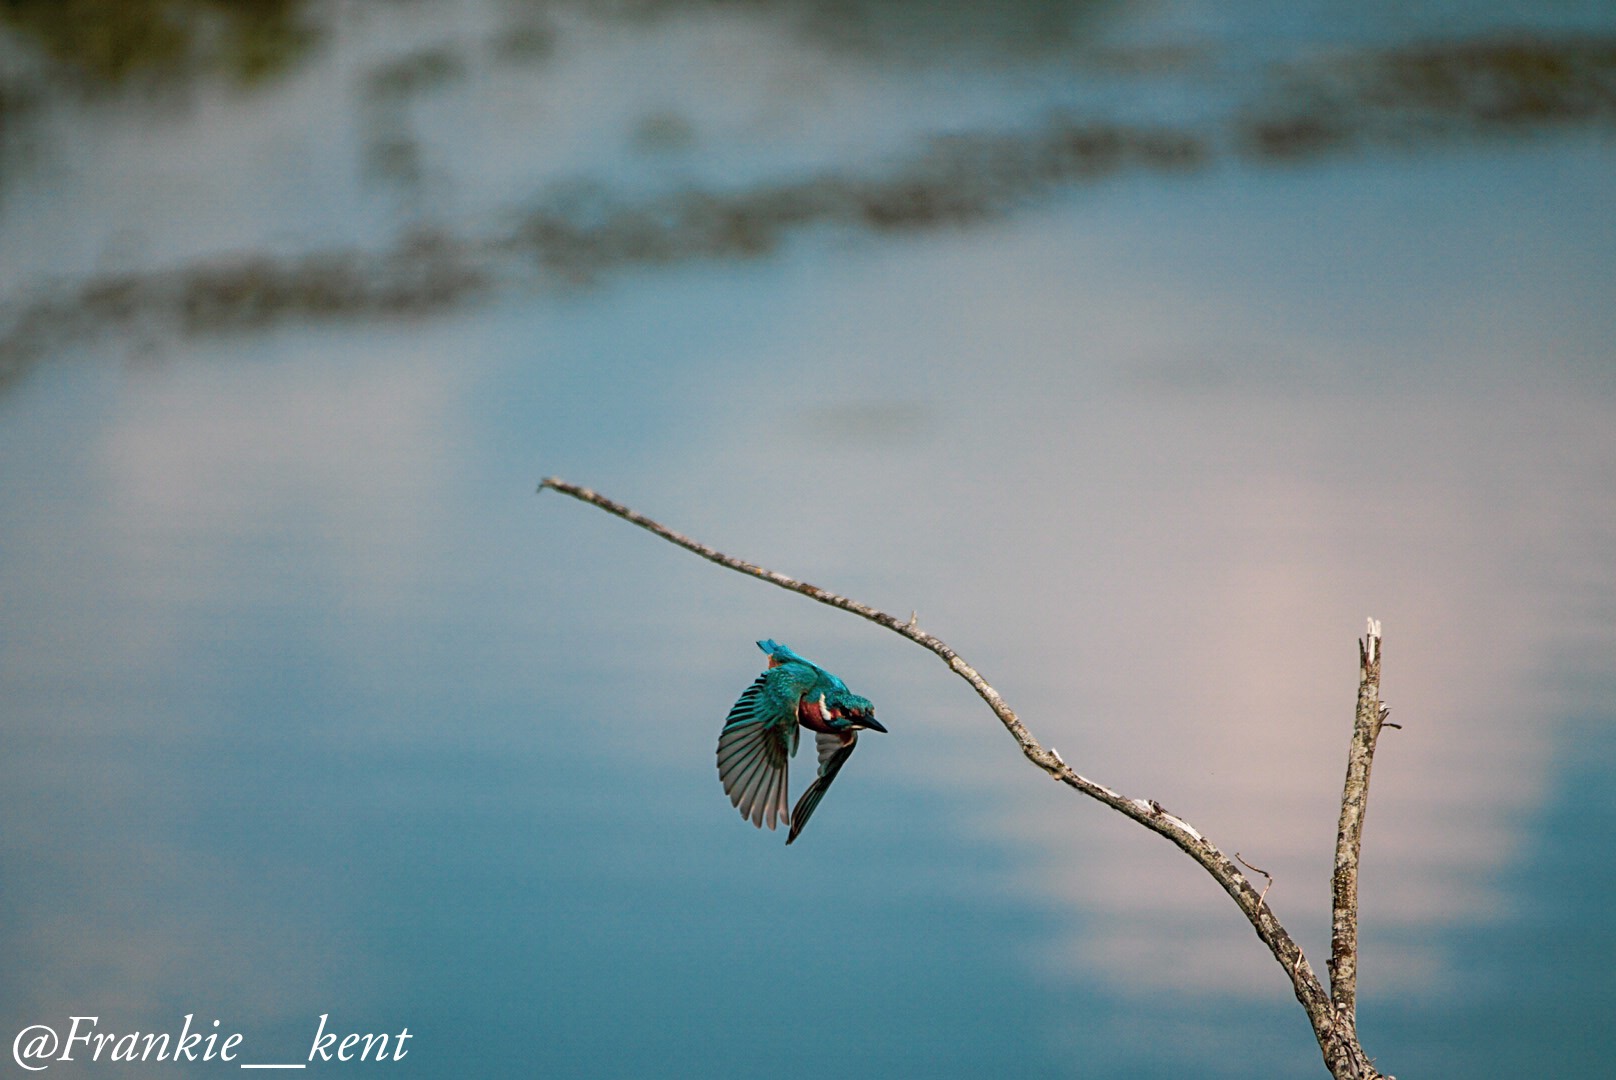 My first time with the Kingfisher ...